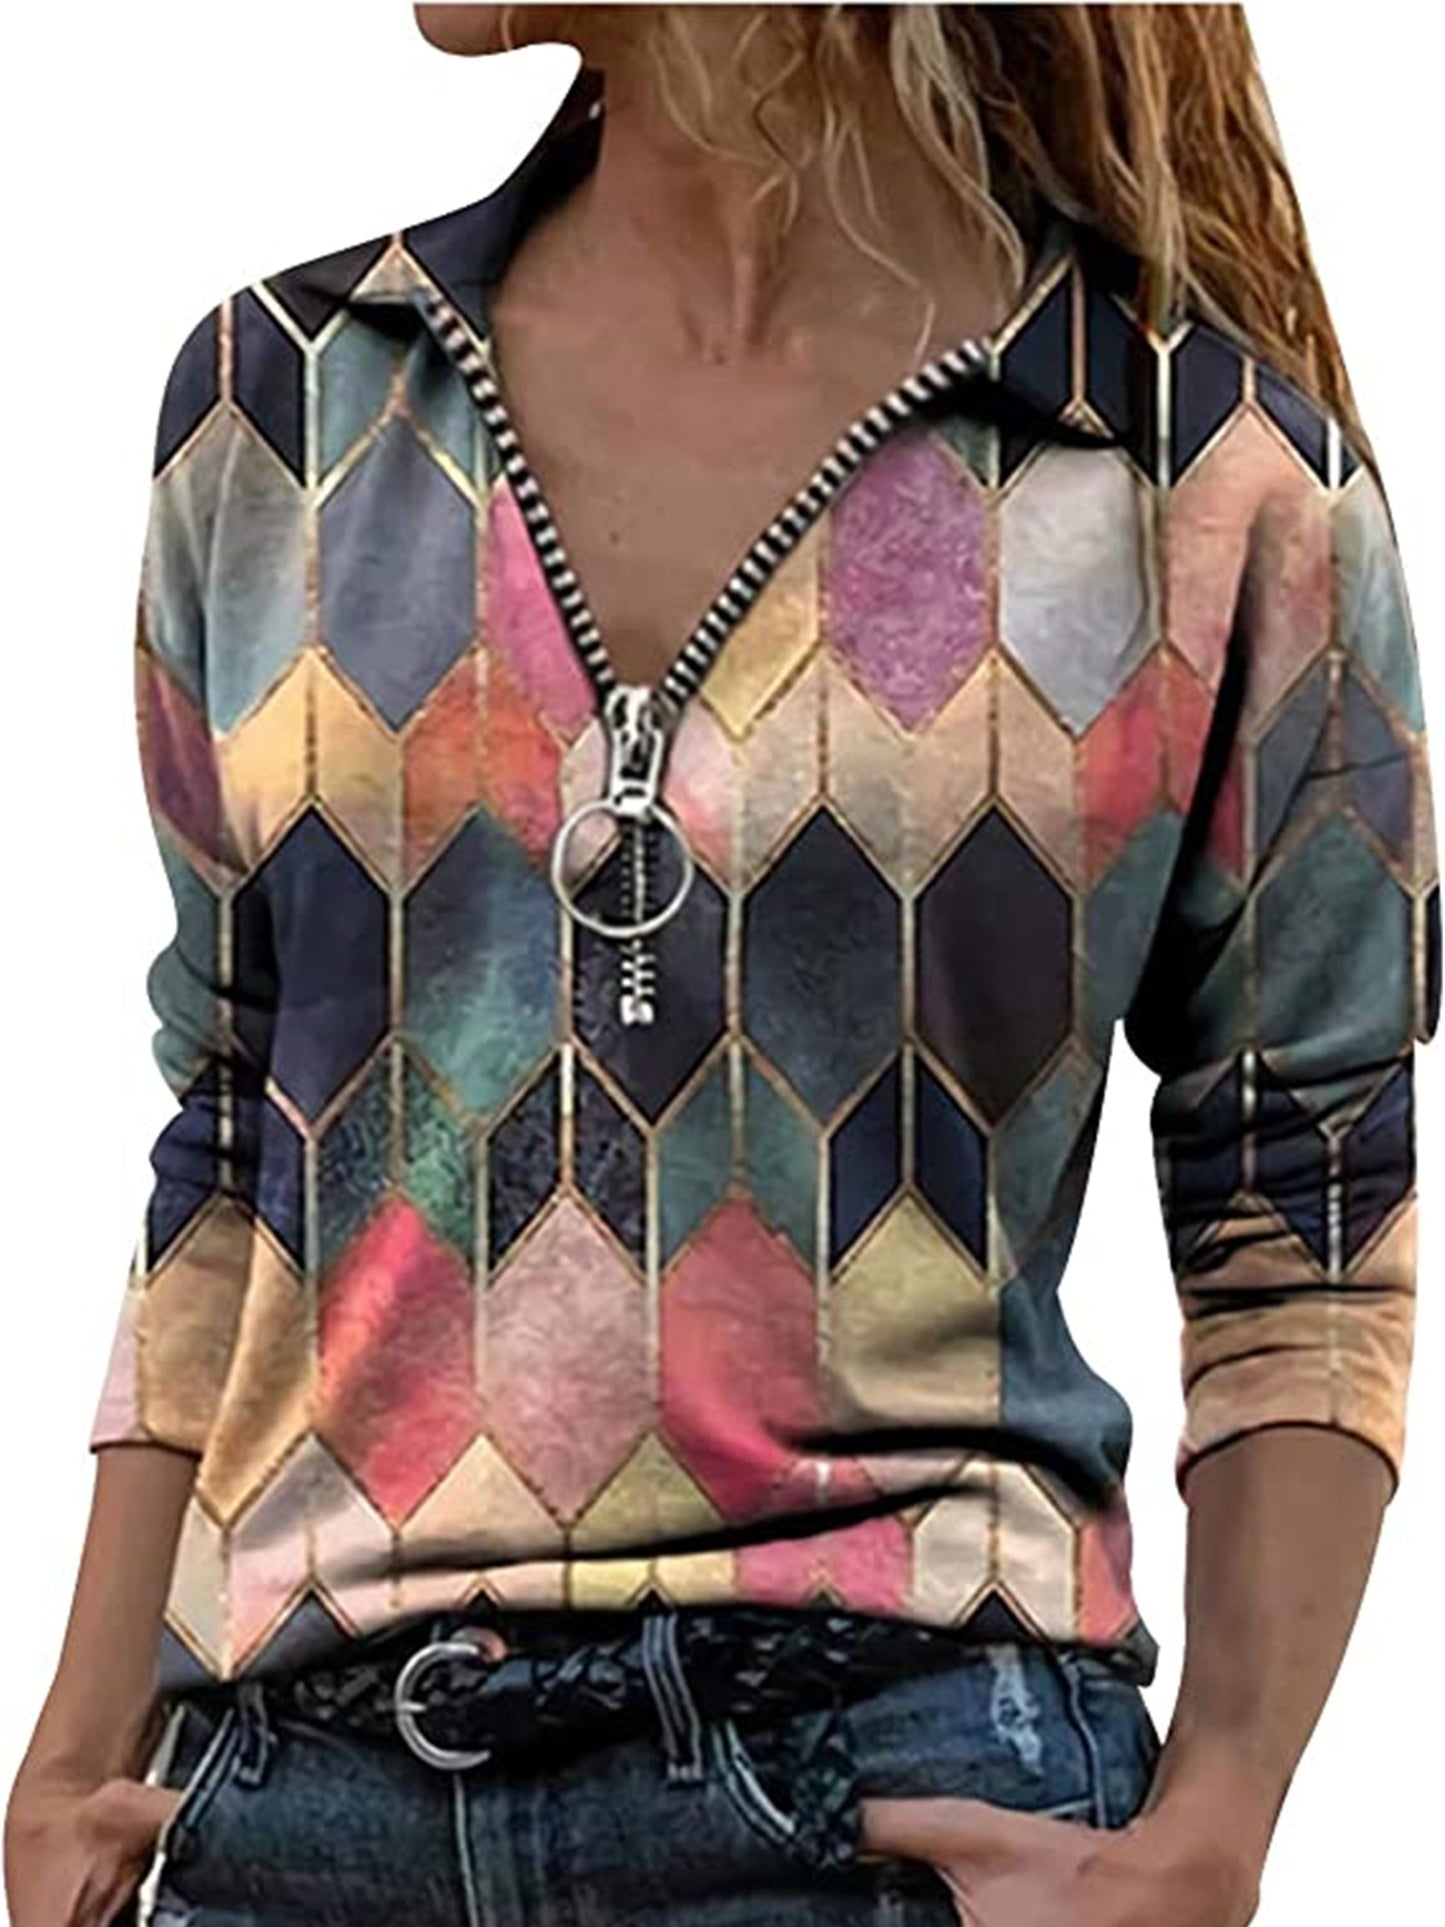 Women's Business Casual Zipper Tops, Elegant & Stylish Tops For Office & Work, Women's Clothing